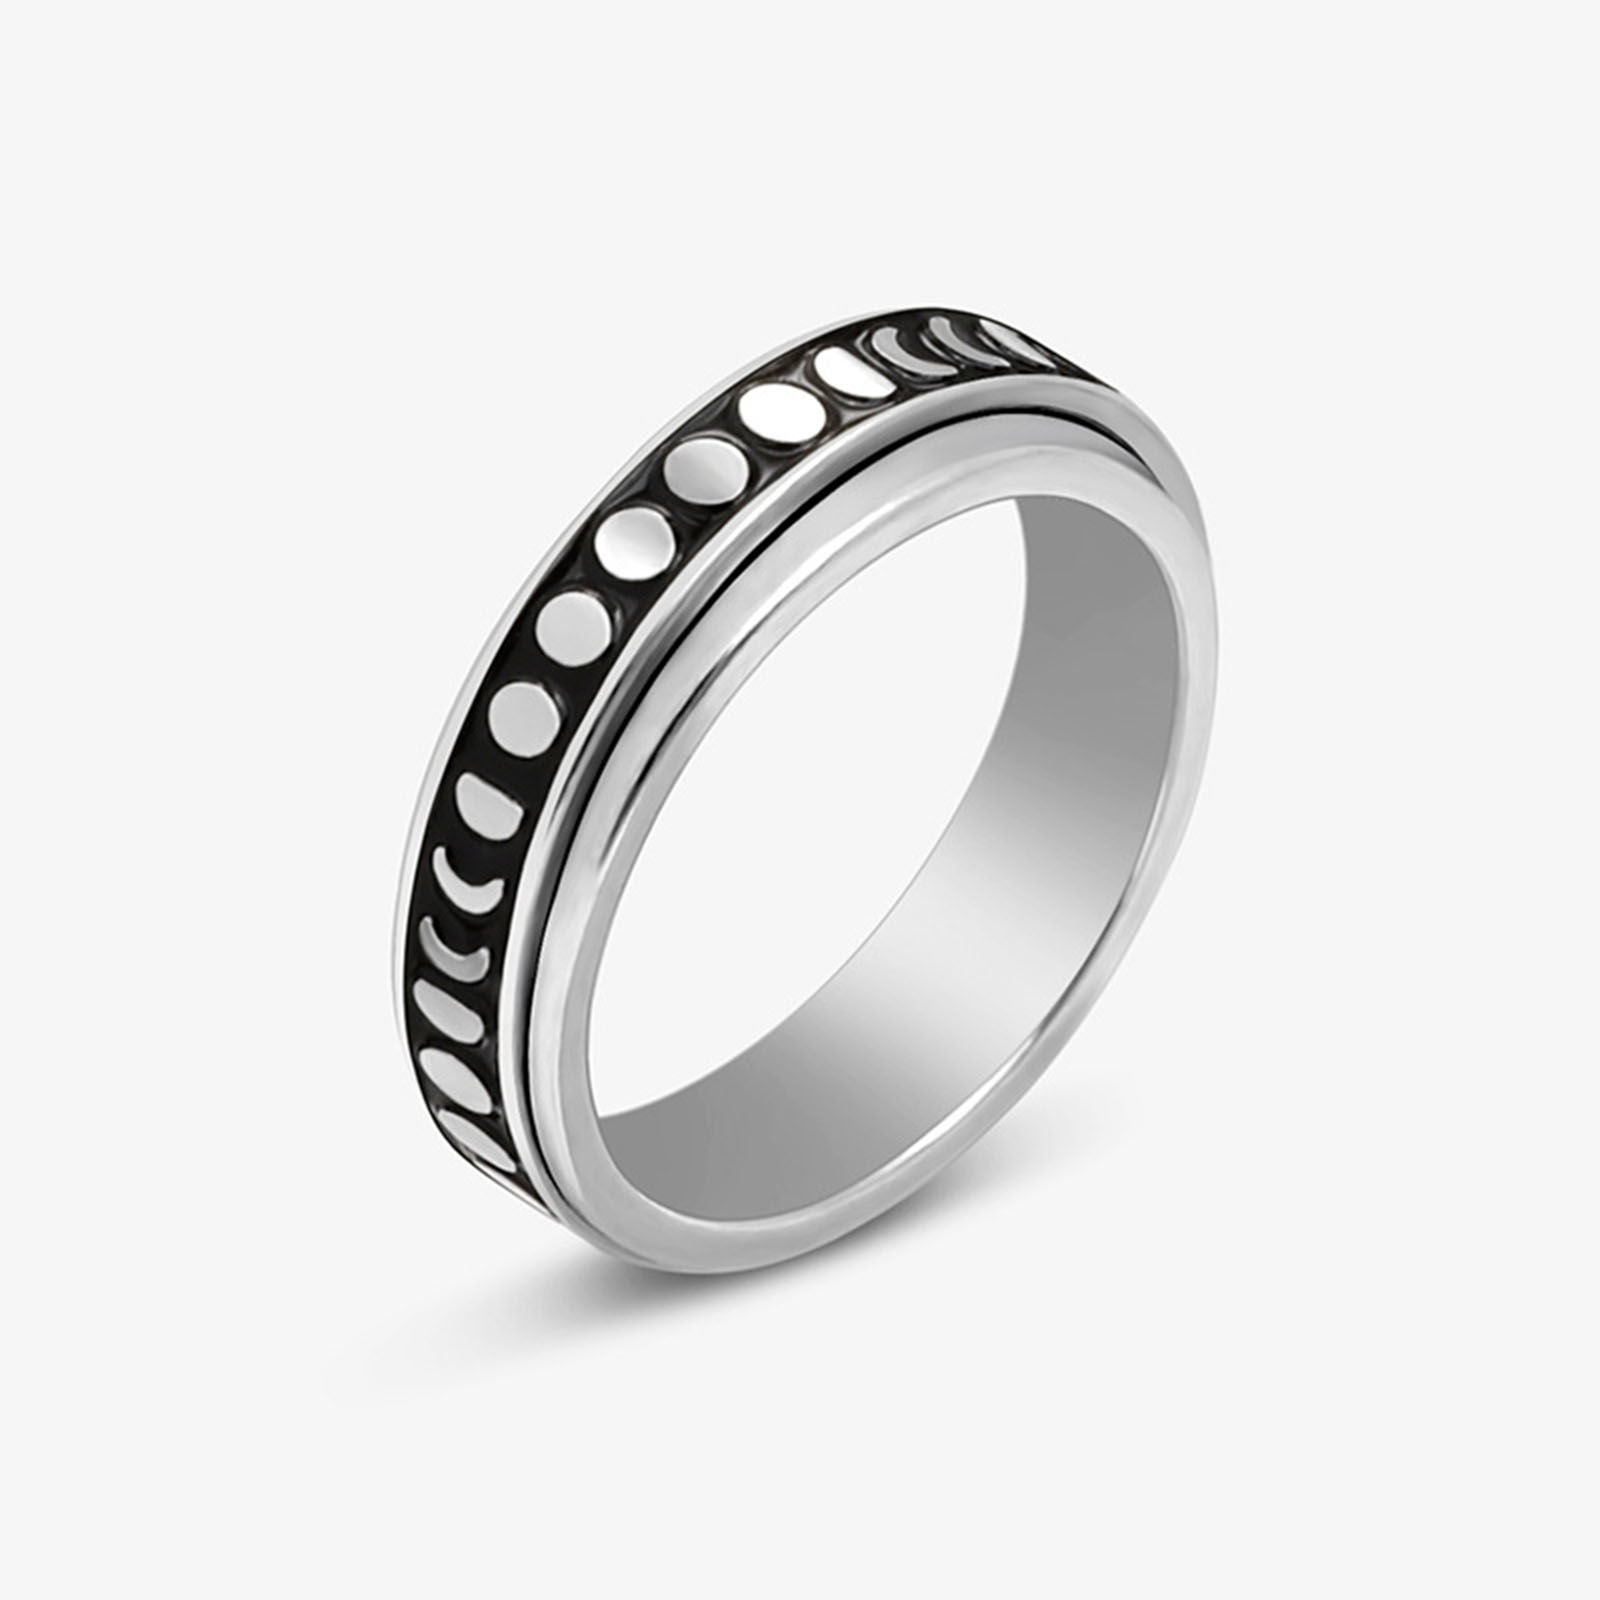 Picture of Stainless Steel Unadjustable Spinner Rings Fidget Ring Stress Relieving Anxiety Ring Silver Tone Black Rotatable Half Moon Enamel 18.9mm(US Size 9), 1 Piece